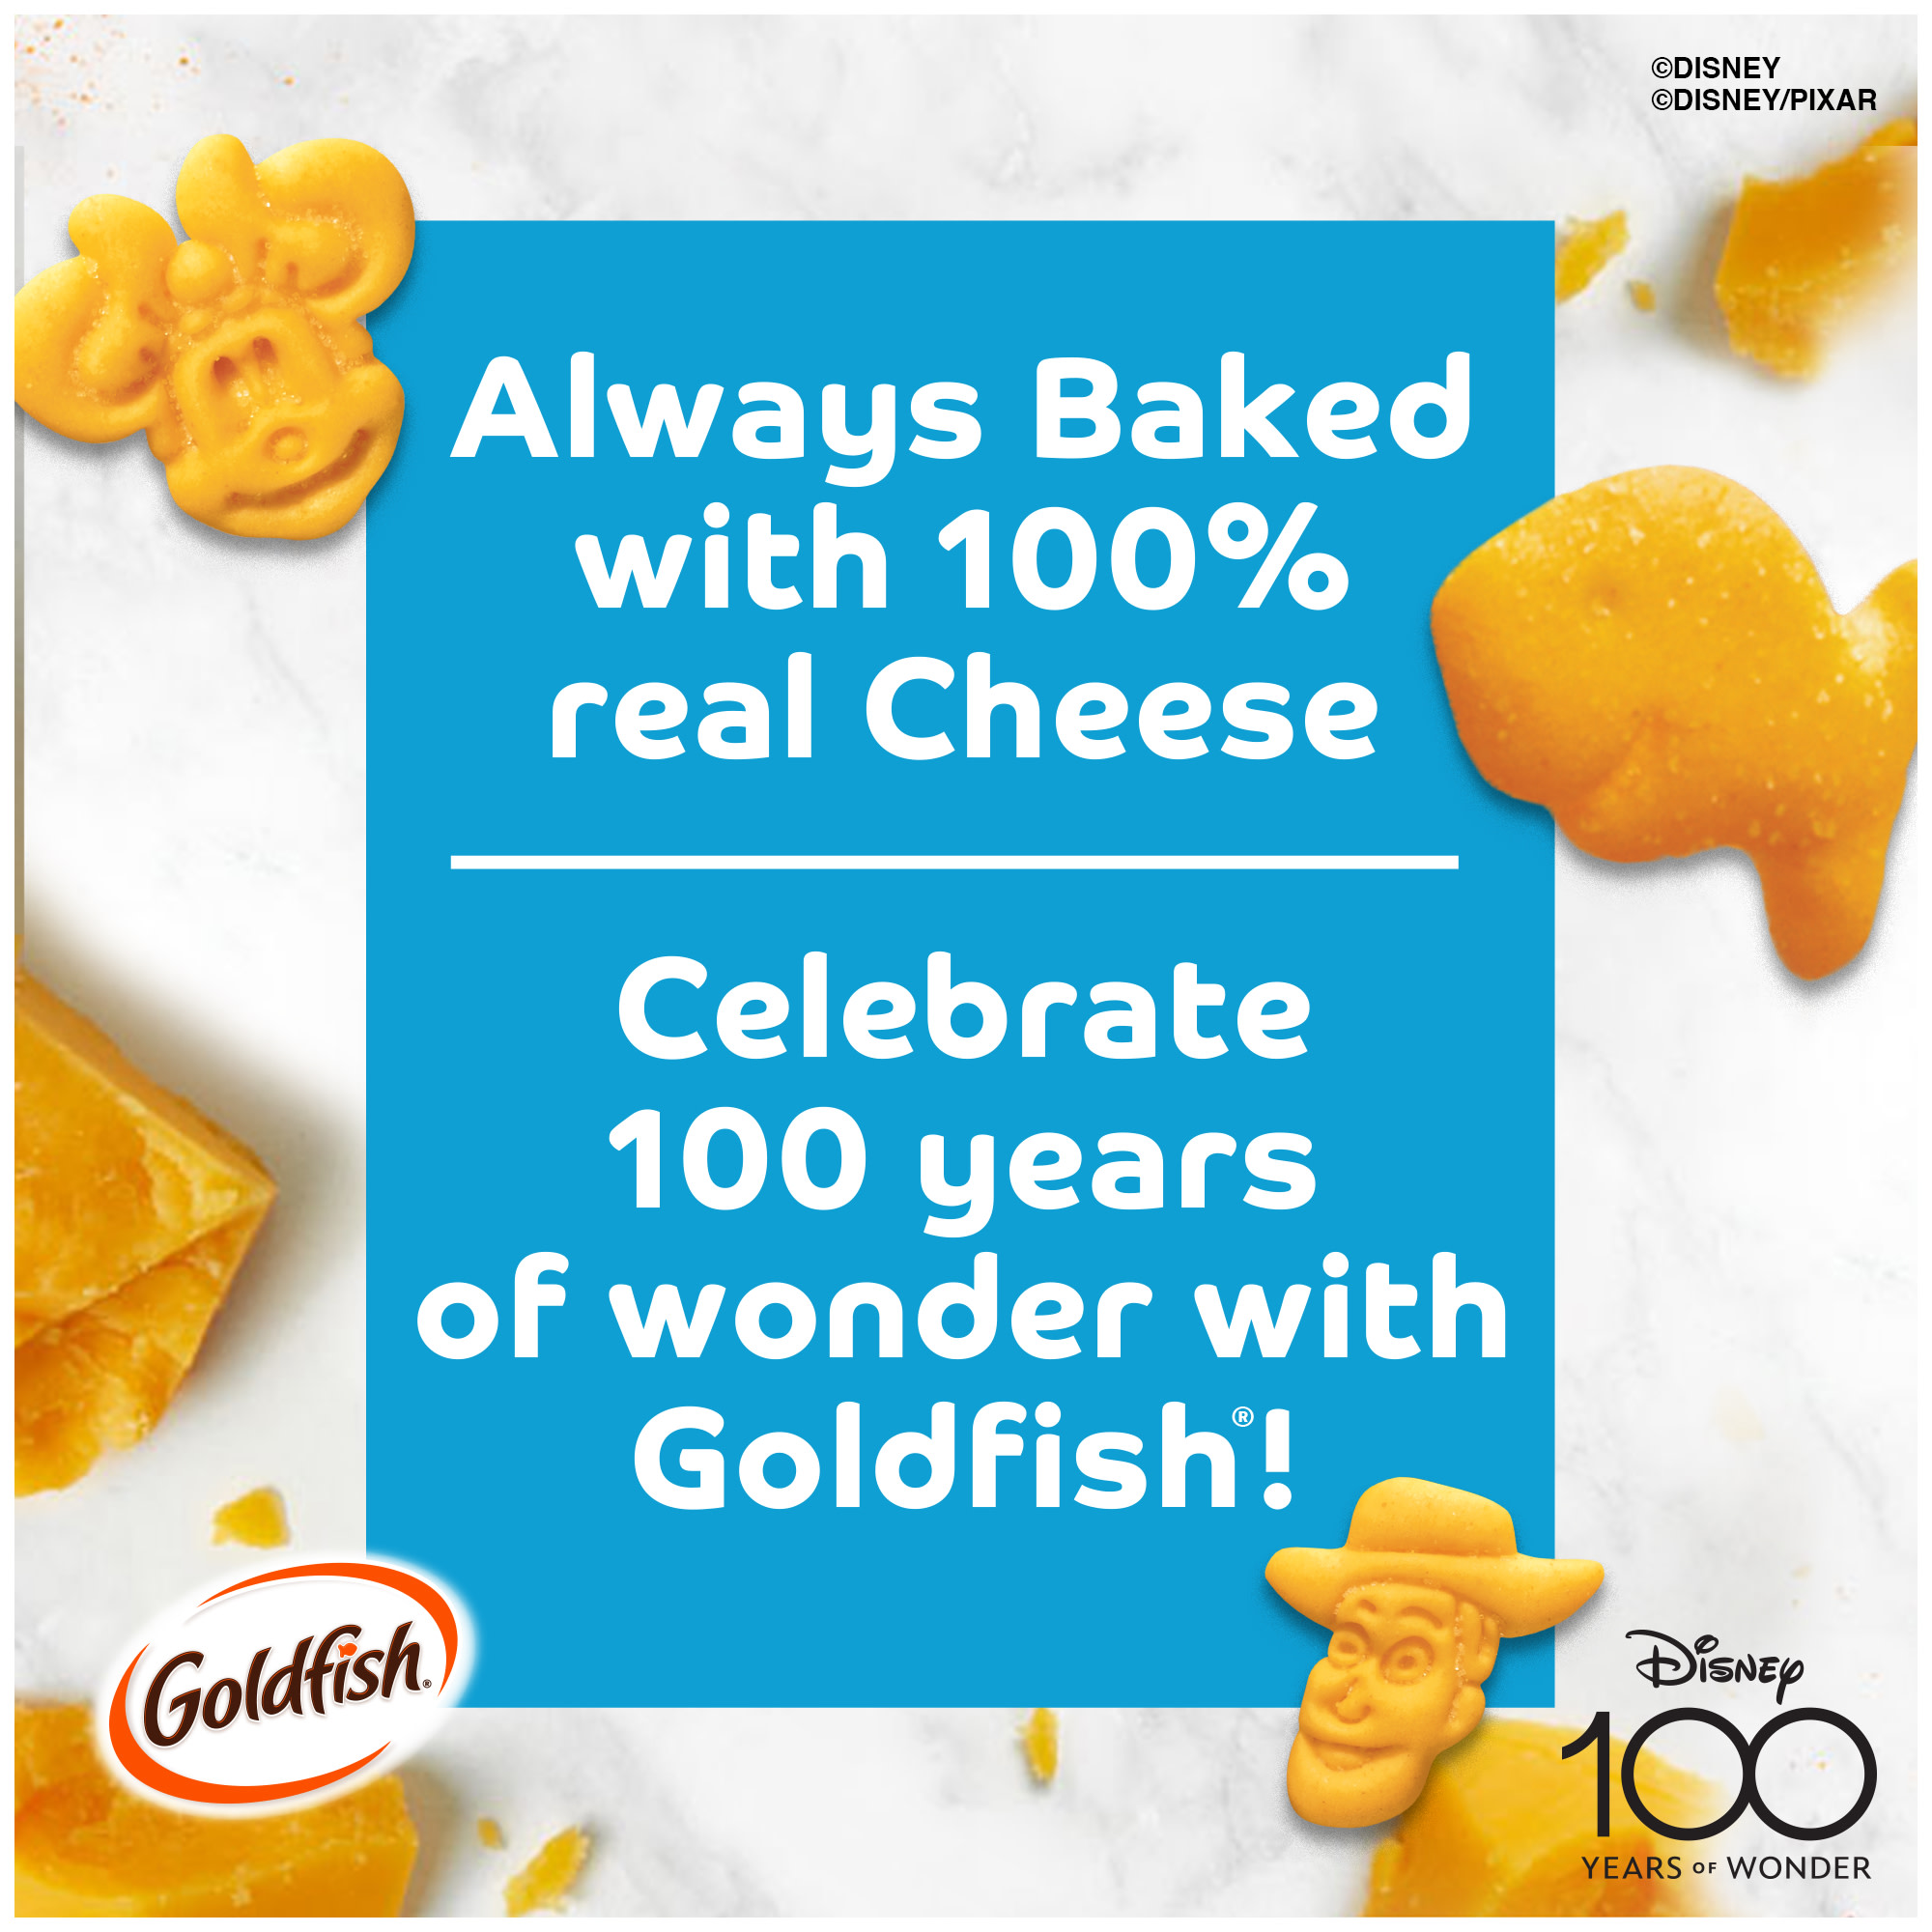 Goldfish Limited Edition Disney 100th Cheddar Crackers, Snack Crackers, 6.6 oz bag - image 2 of 10